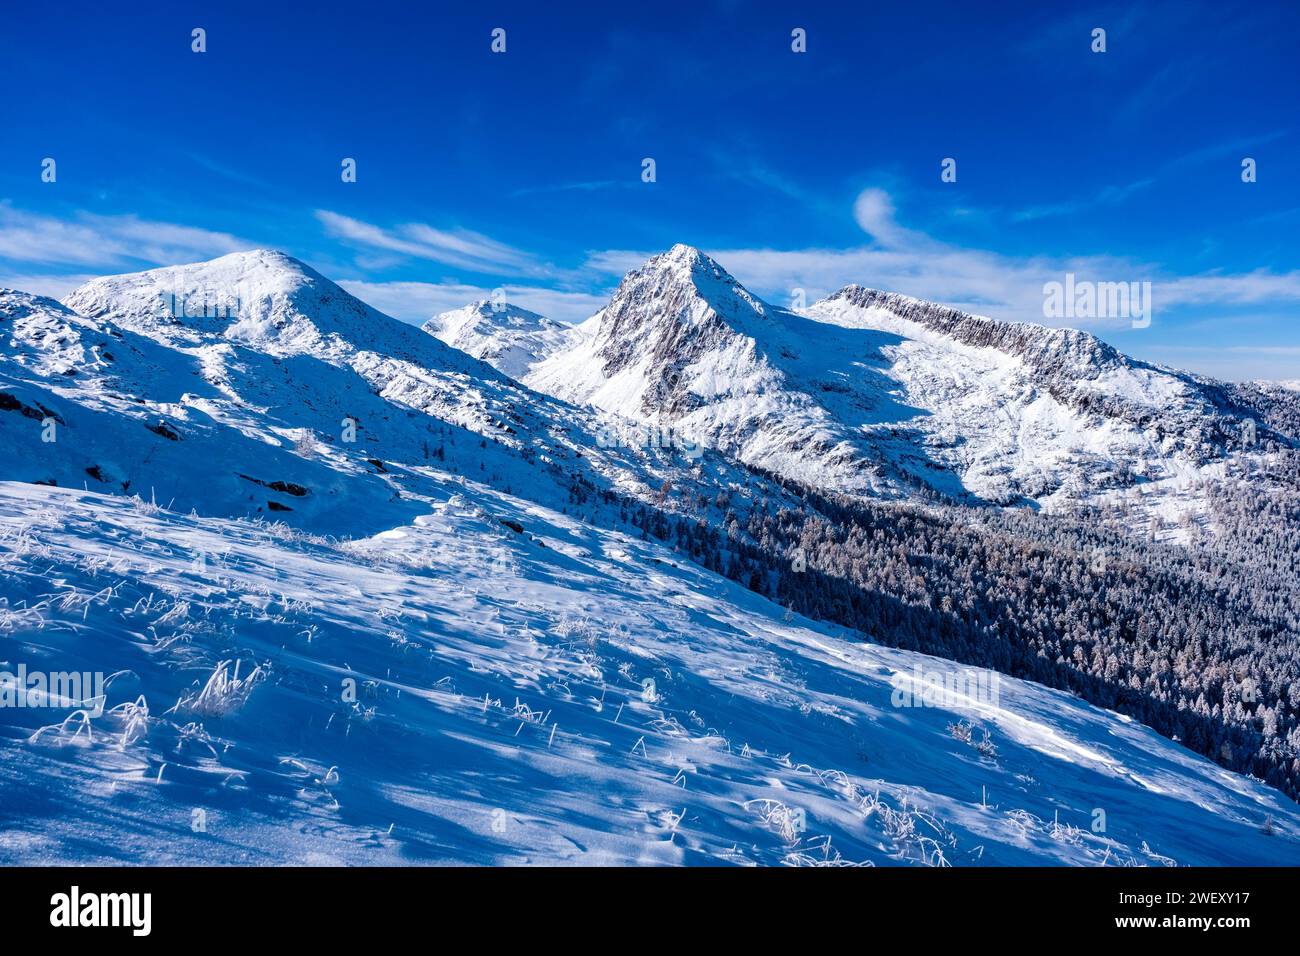 The snow-covered summits of Cavallazza, Cima Val Cigolera and Colbricon Ovest, seen from the summit of Tognazza in winter. Stock Photo